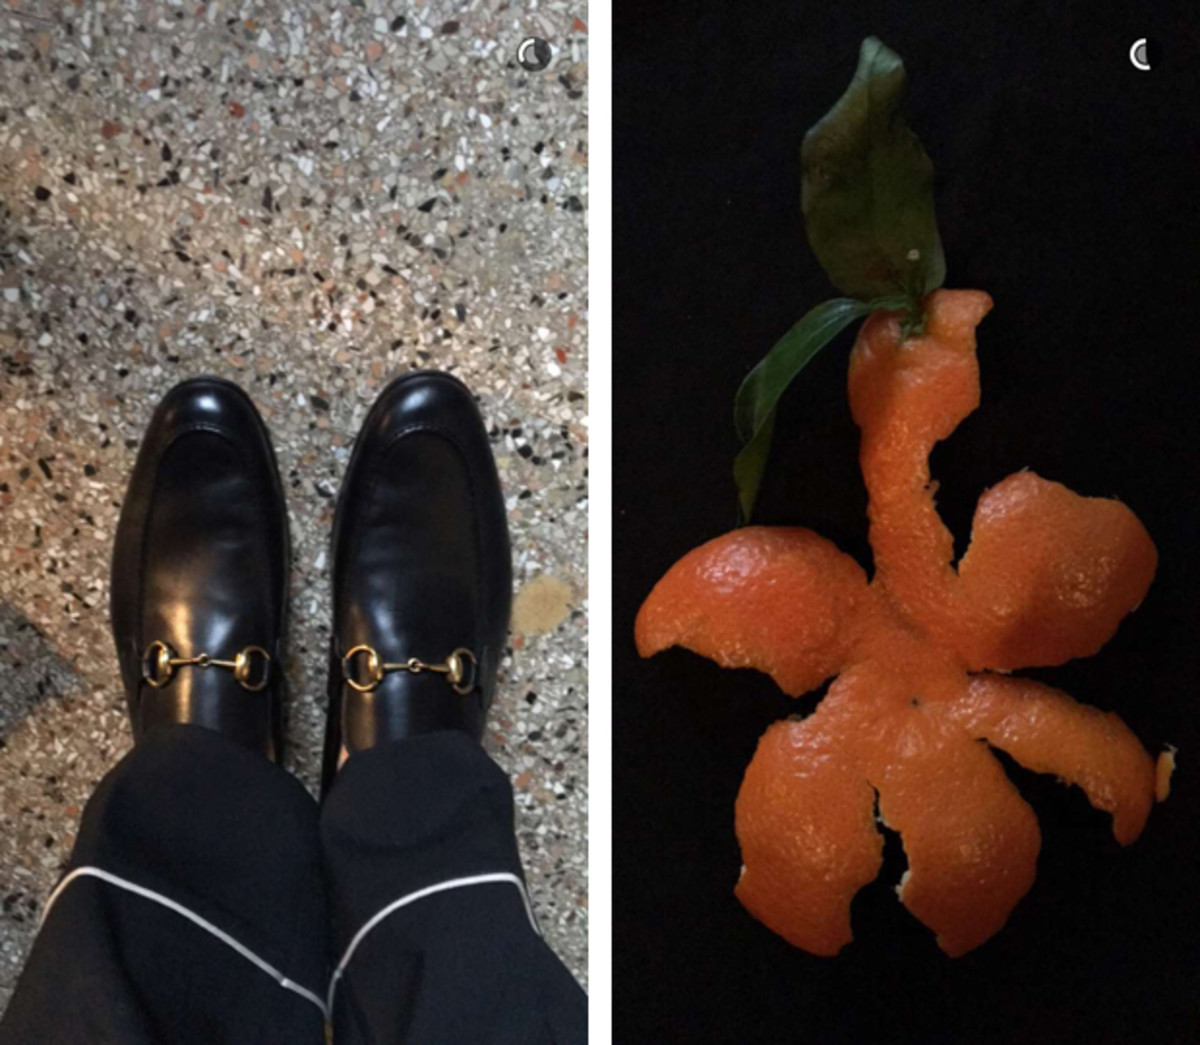 Jared Leto's Gucci loafers and an artistic rendition of eaten fruit. Photo: Snapchat/@gucci